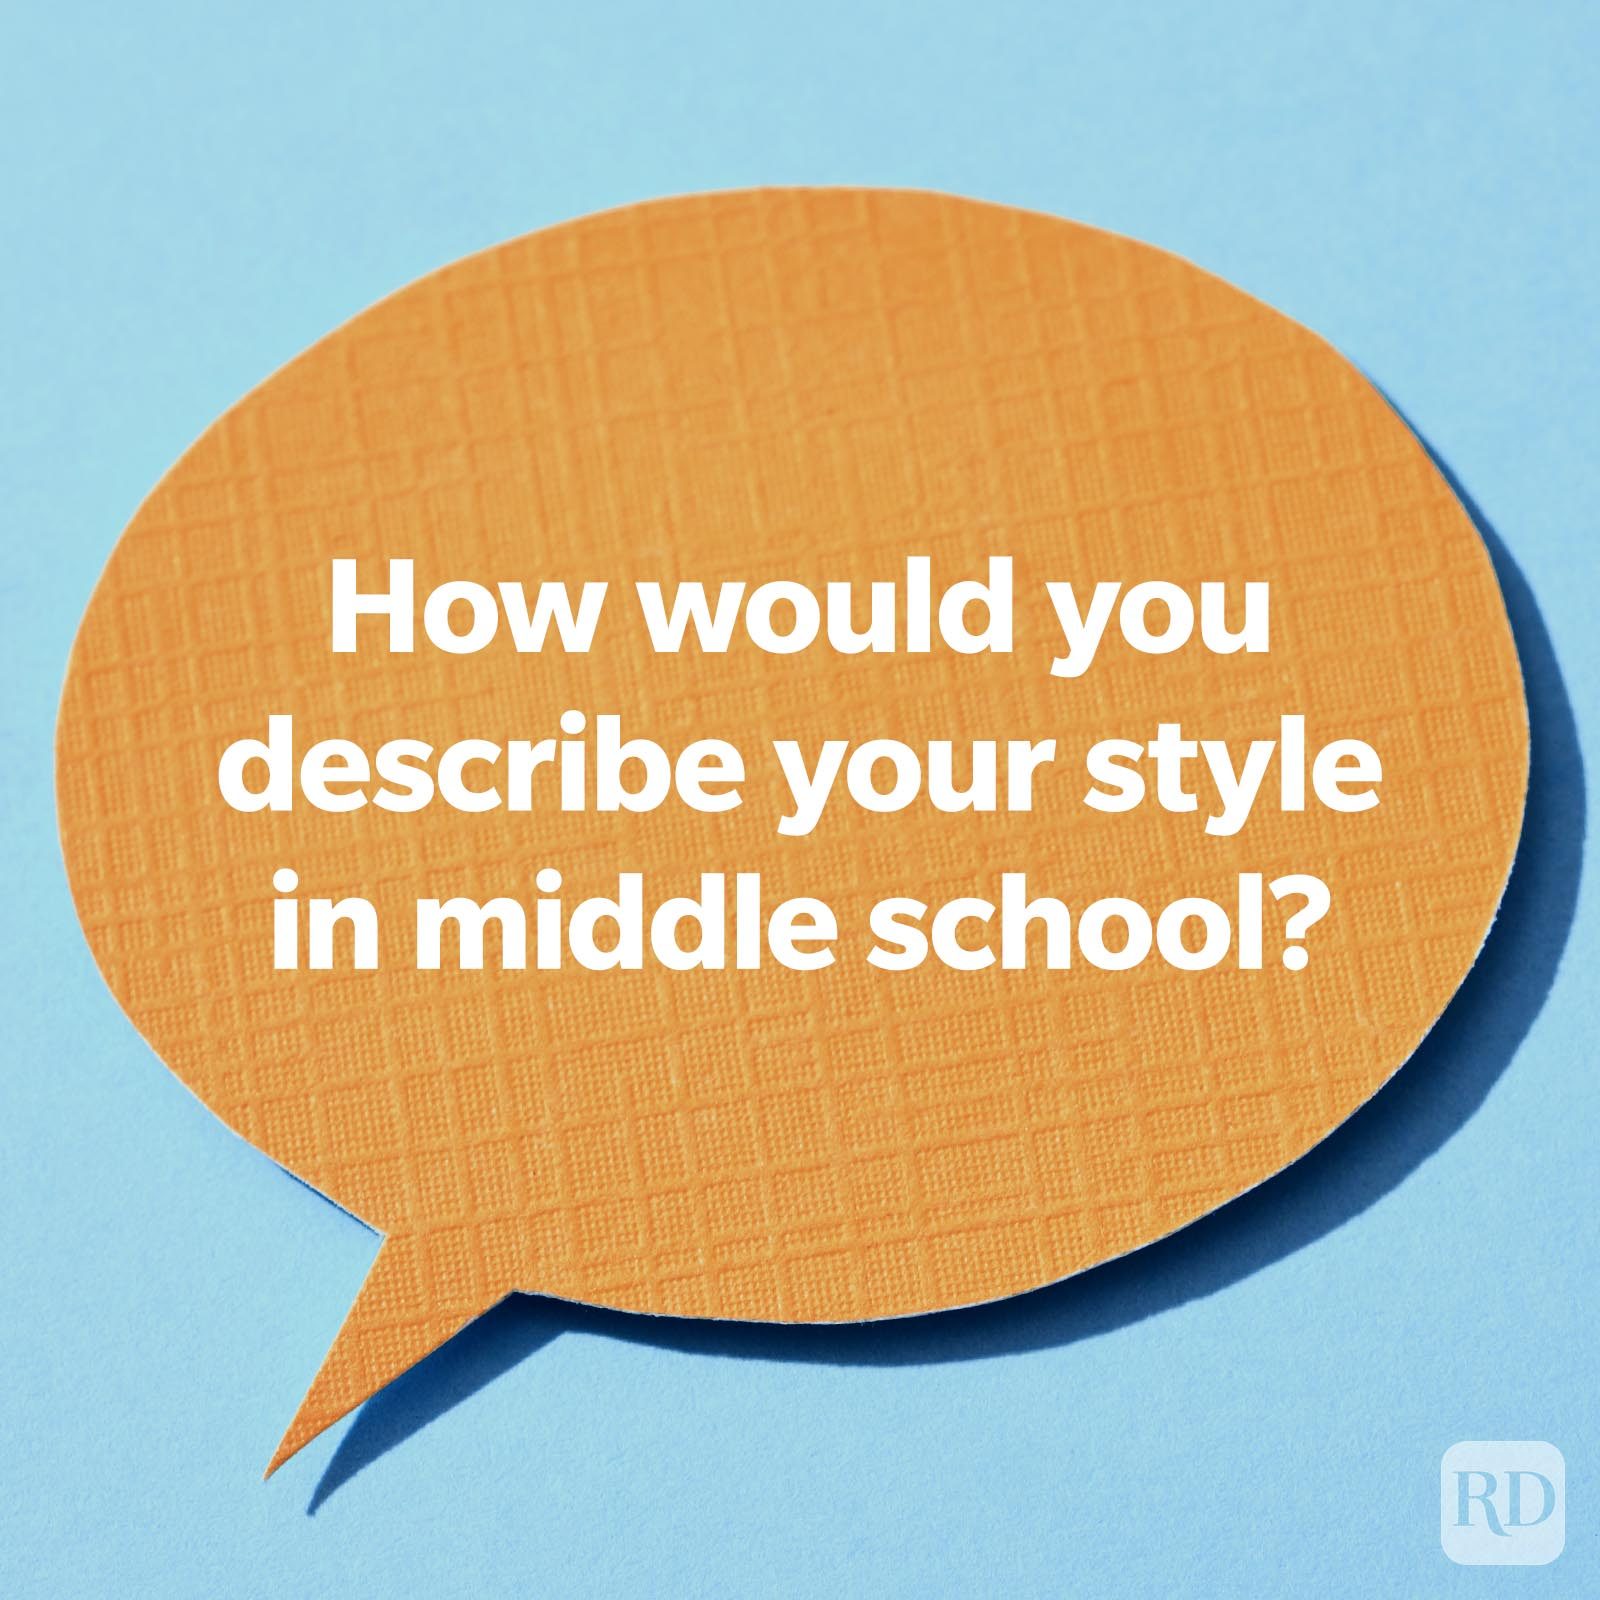 How would you describe your style in middle school?